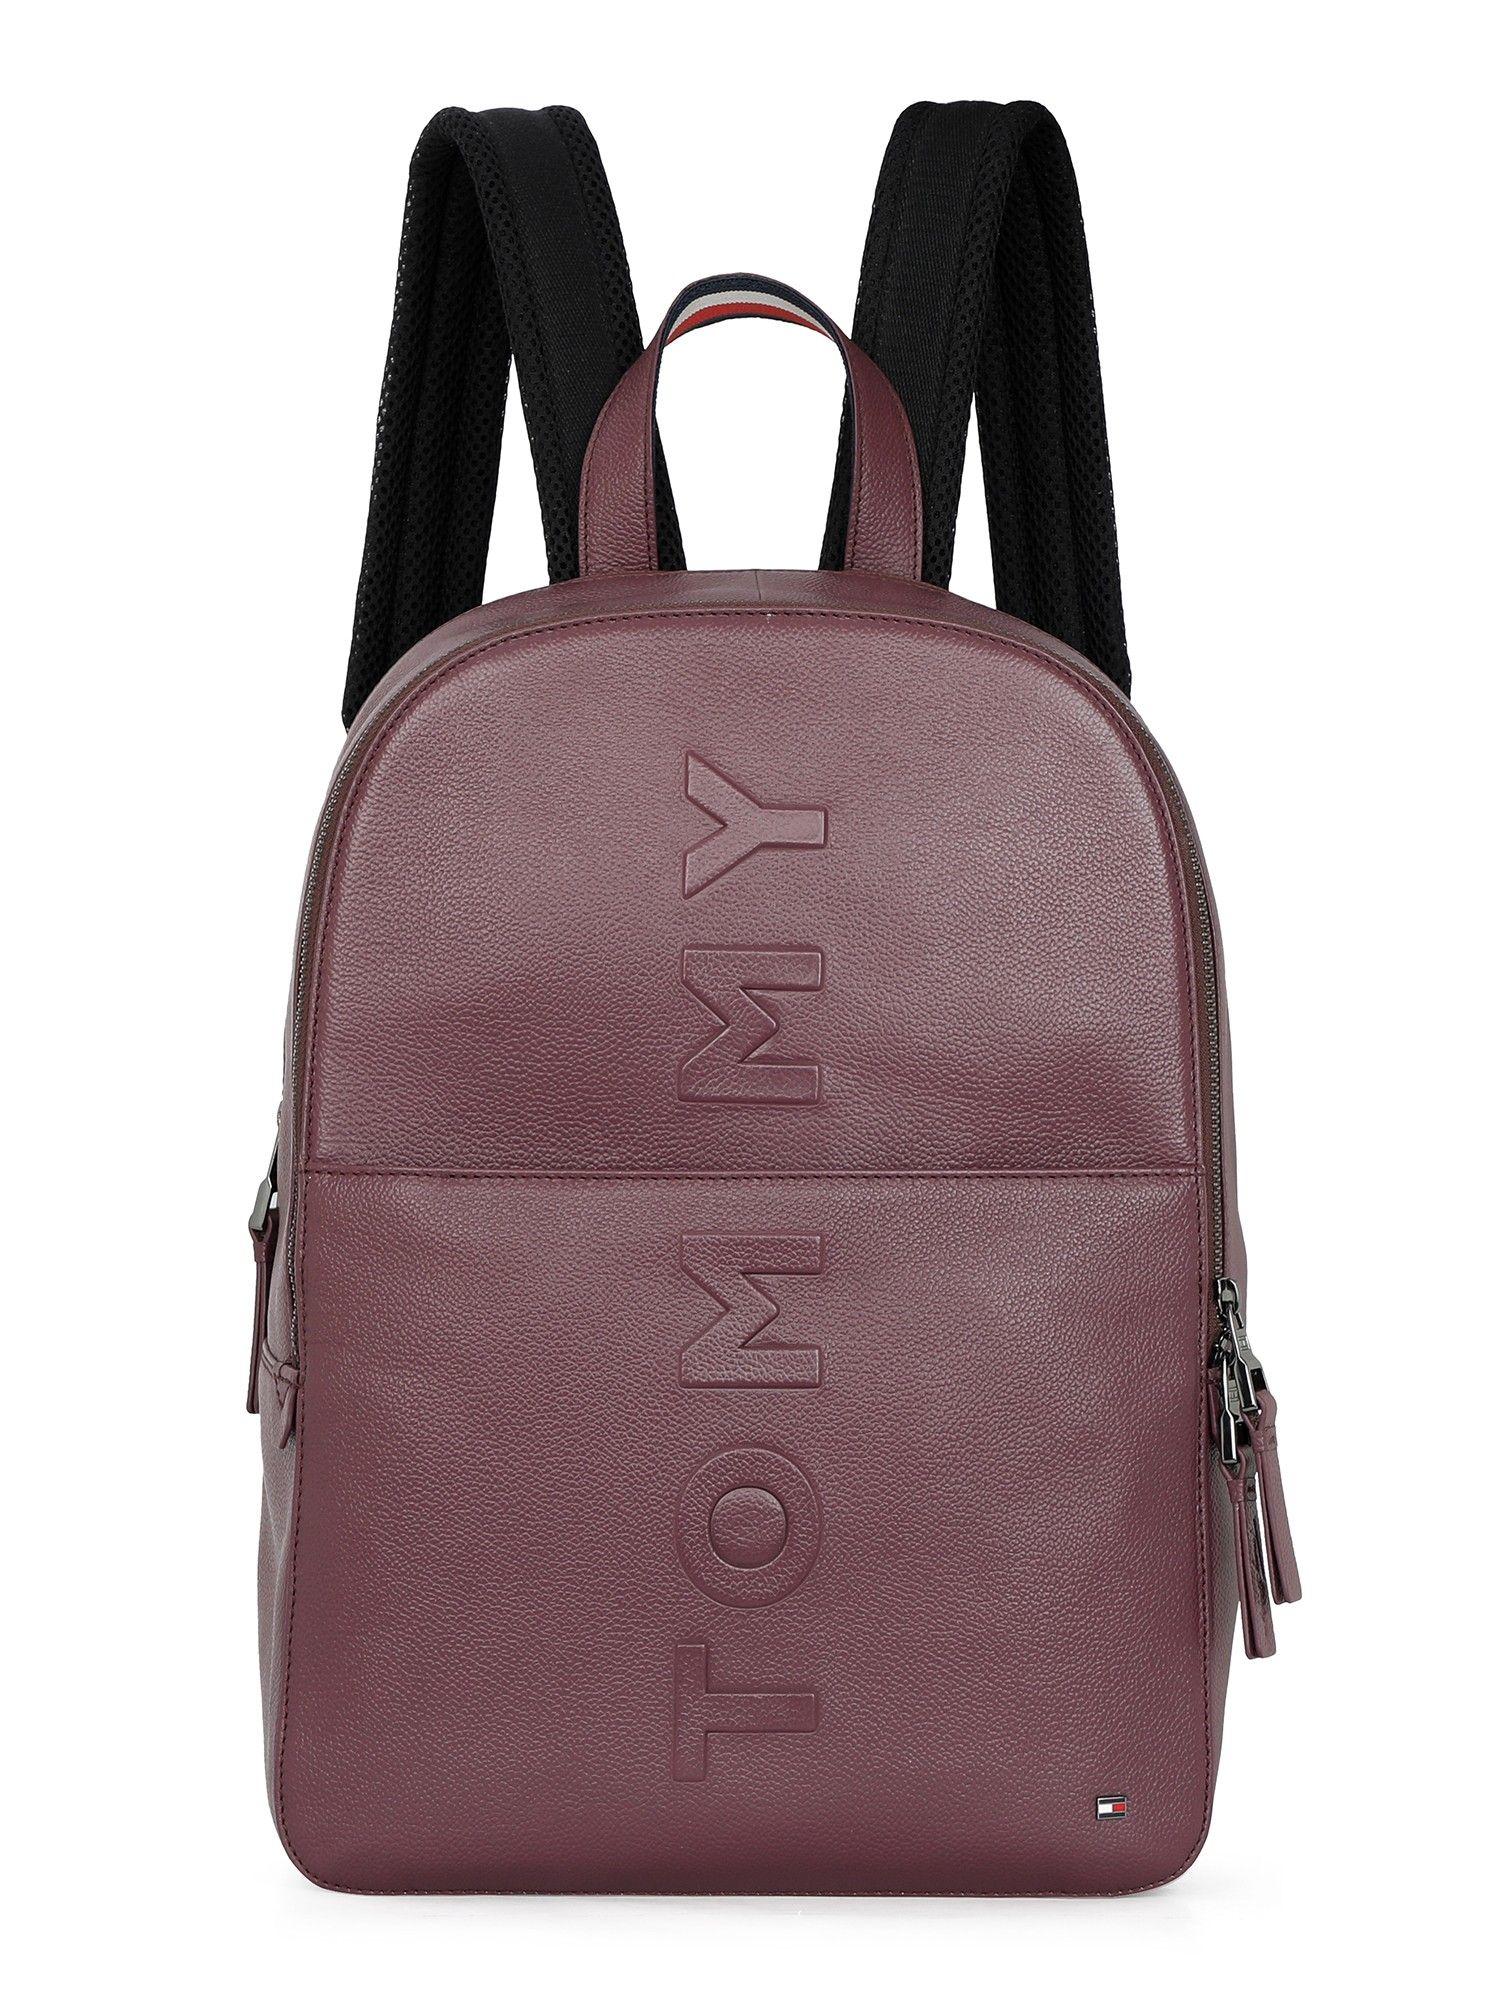 time-square-laptop-backpack-textured-maroon-8903496176179